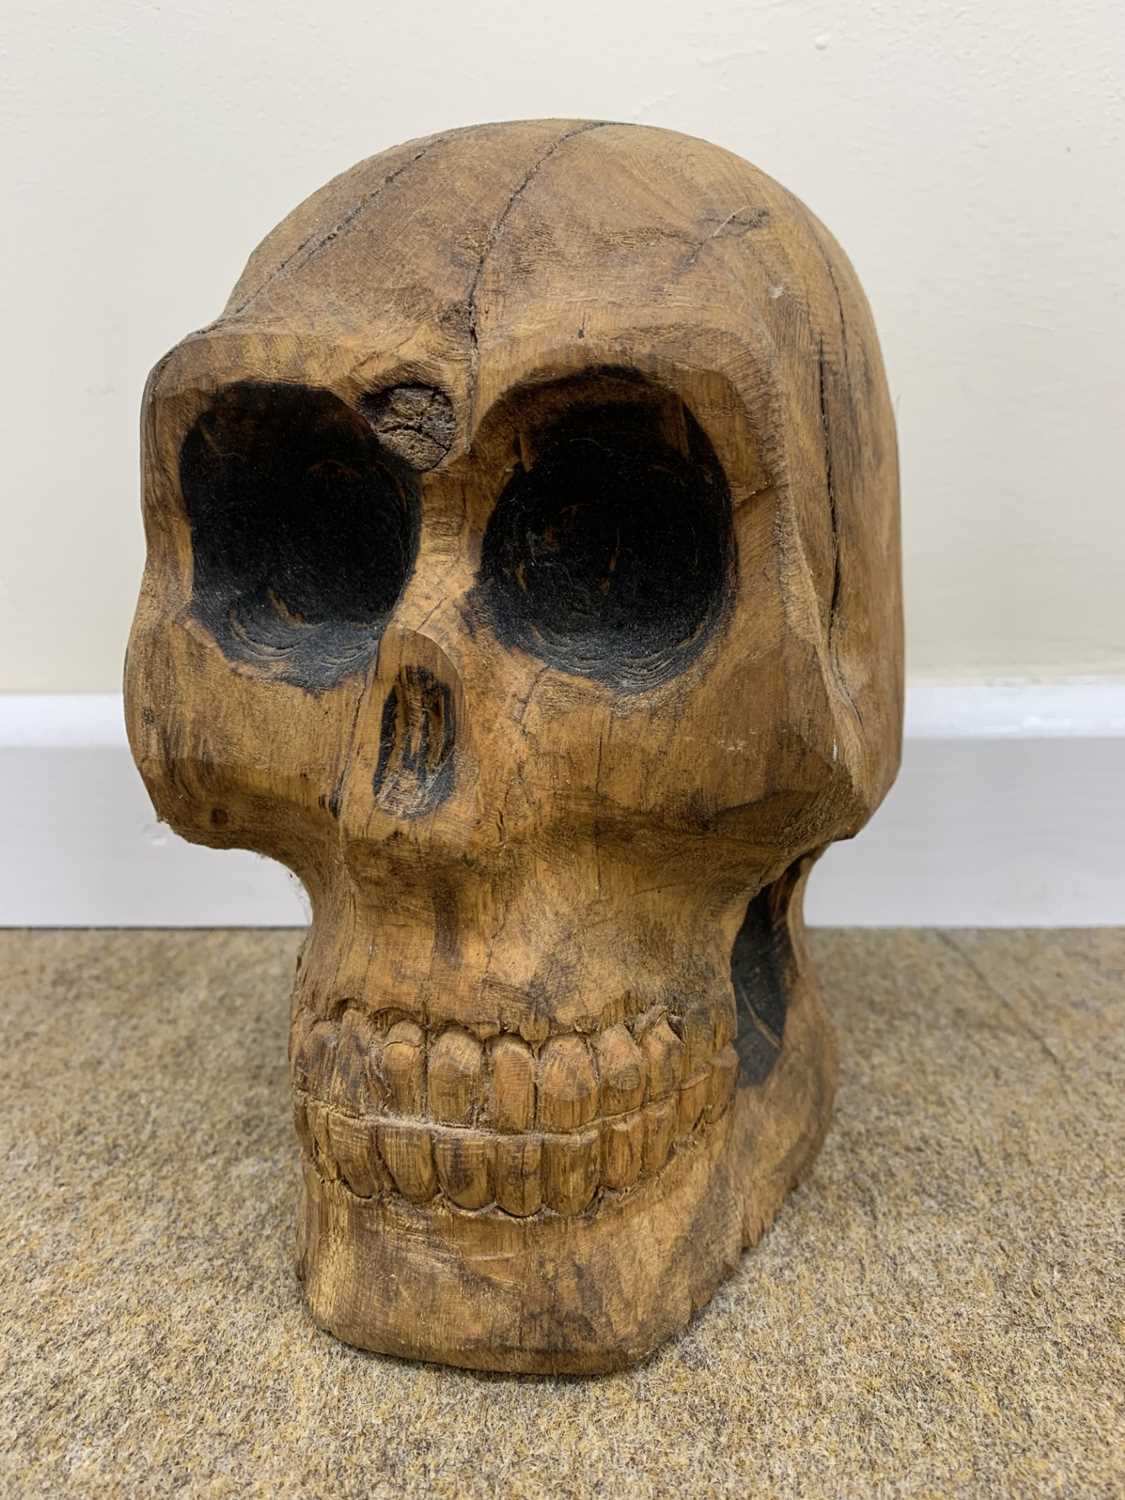 Attributed to David Chedgey (British, b.1940), Carved wood skull sculpture, 12x20cm approx. - Image 2 of 2